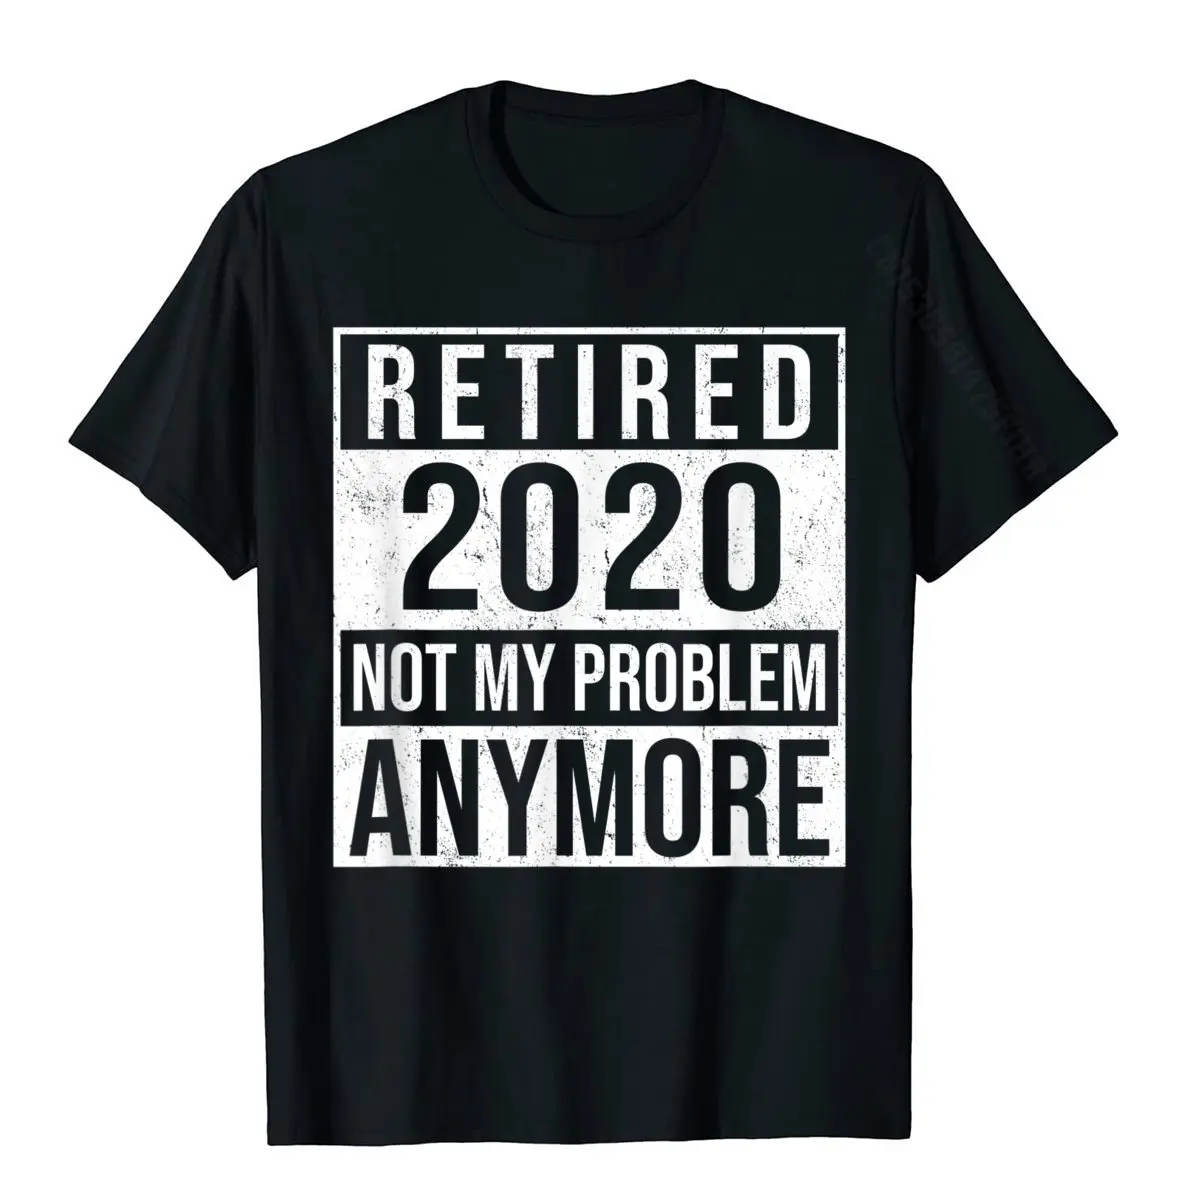 Retired 2020 Shirt, Funny Retirement Gift Tops T Shirt Newest Casual Cotton Men Top T-Shirts Design